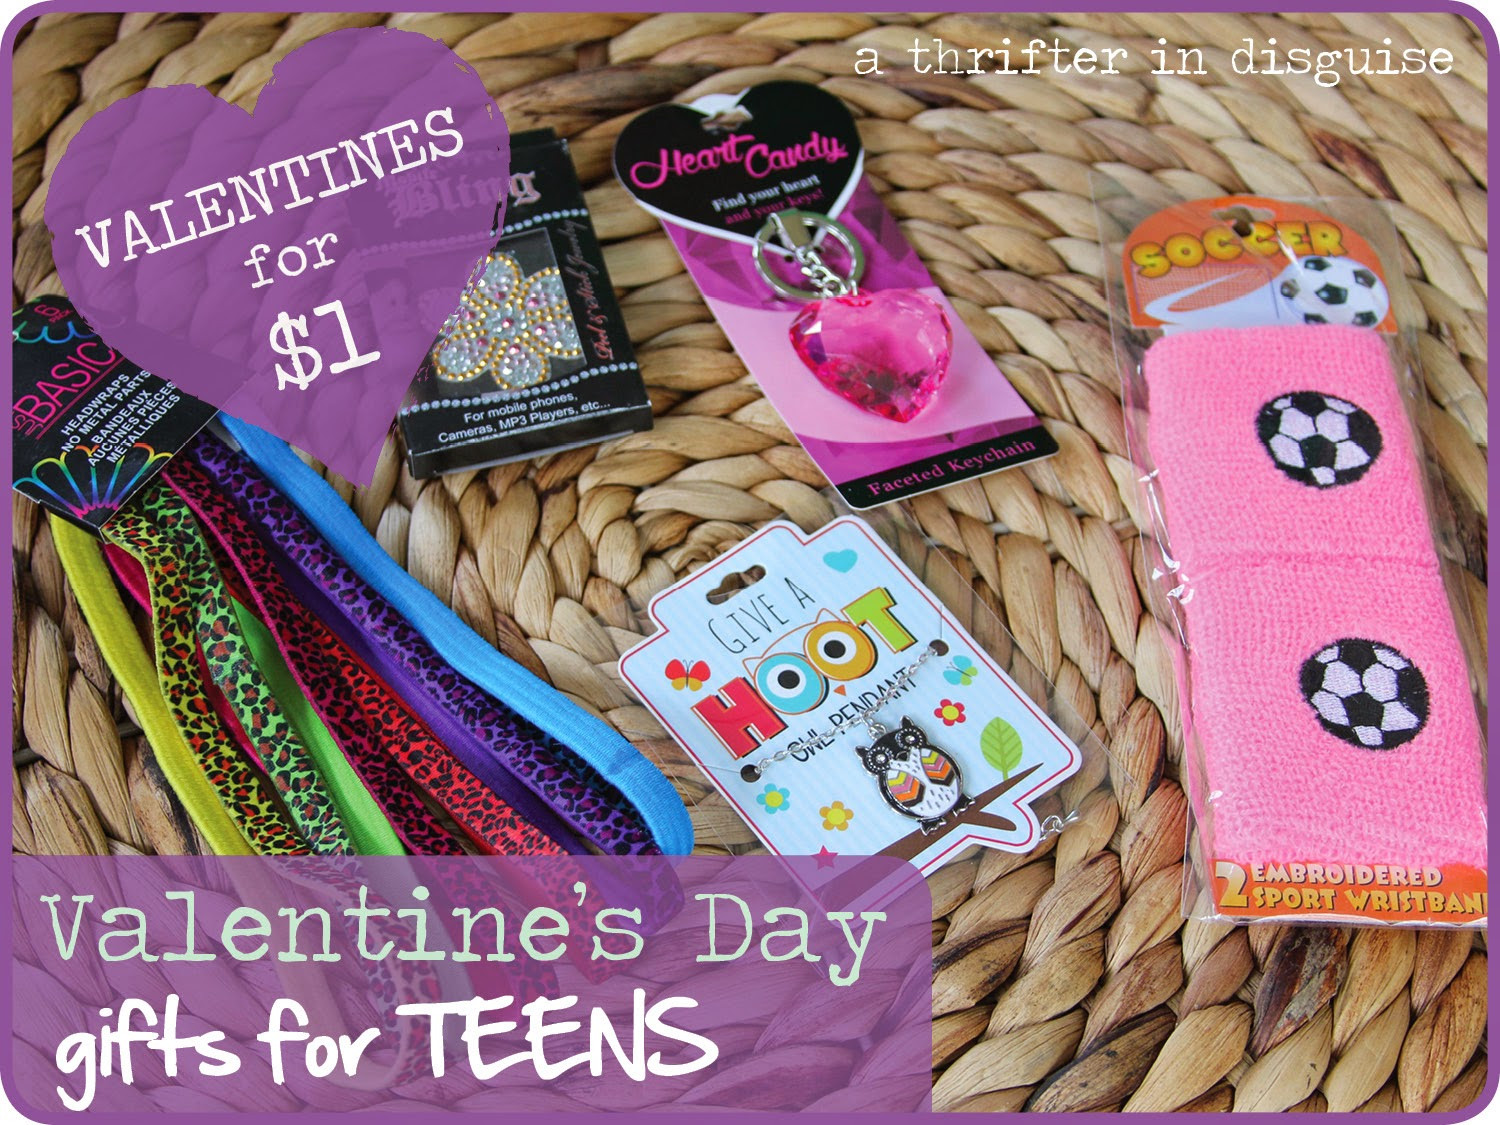 Valentine Gift Ideas For Teenage Daughter
 A Thrifter in Disguise More $1 Valentine s Day Gifts